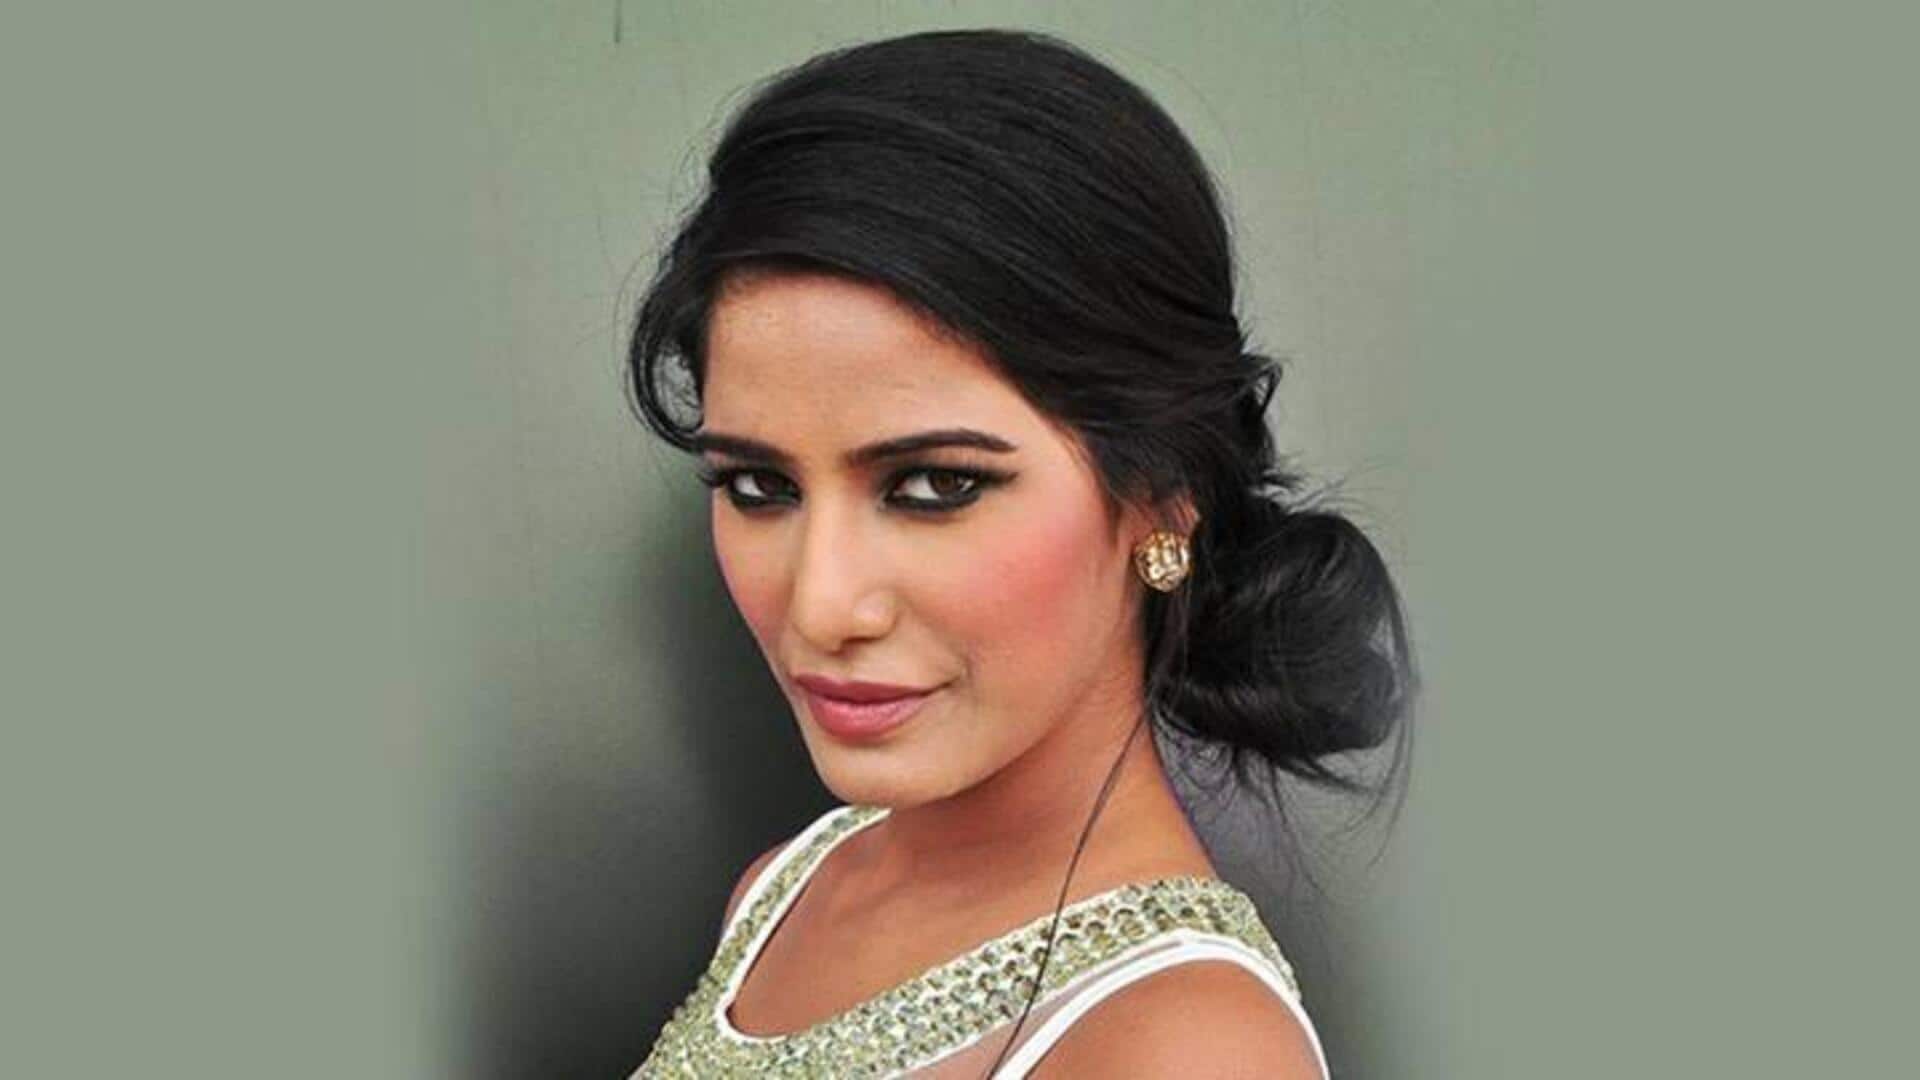 Poonam Pandey alive, apologizes for faking death in fresh videos